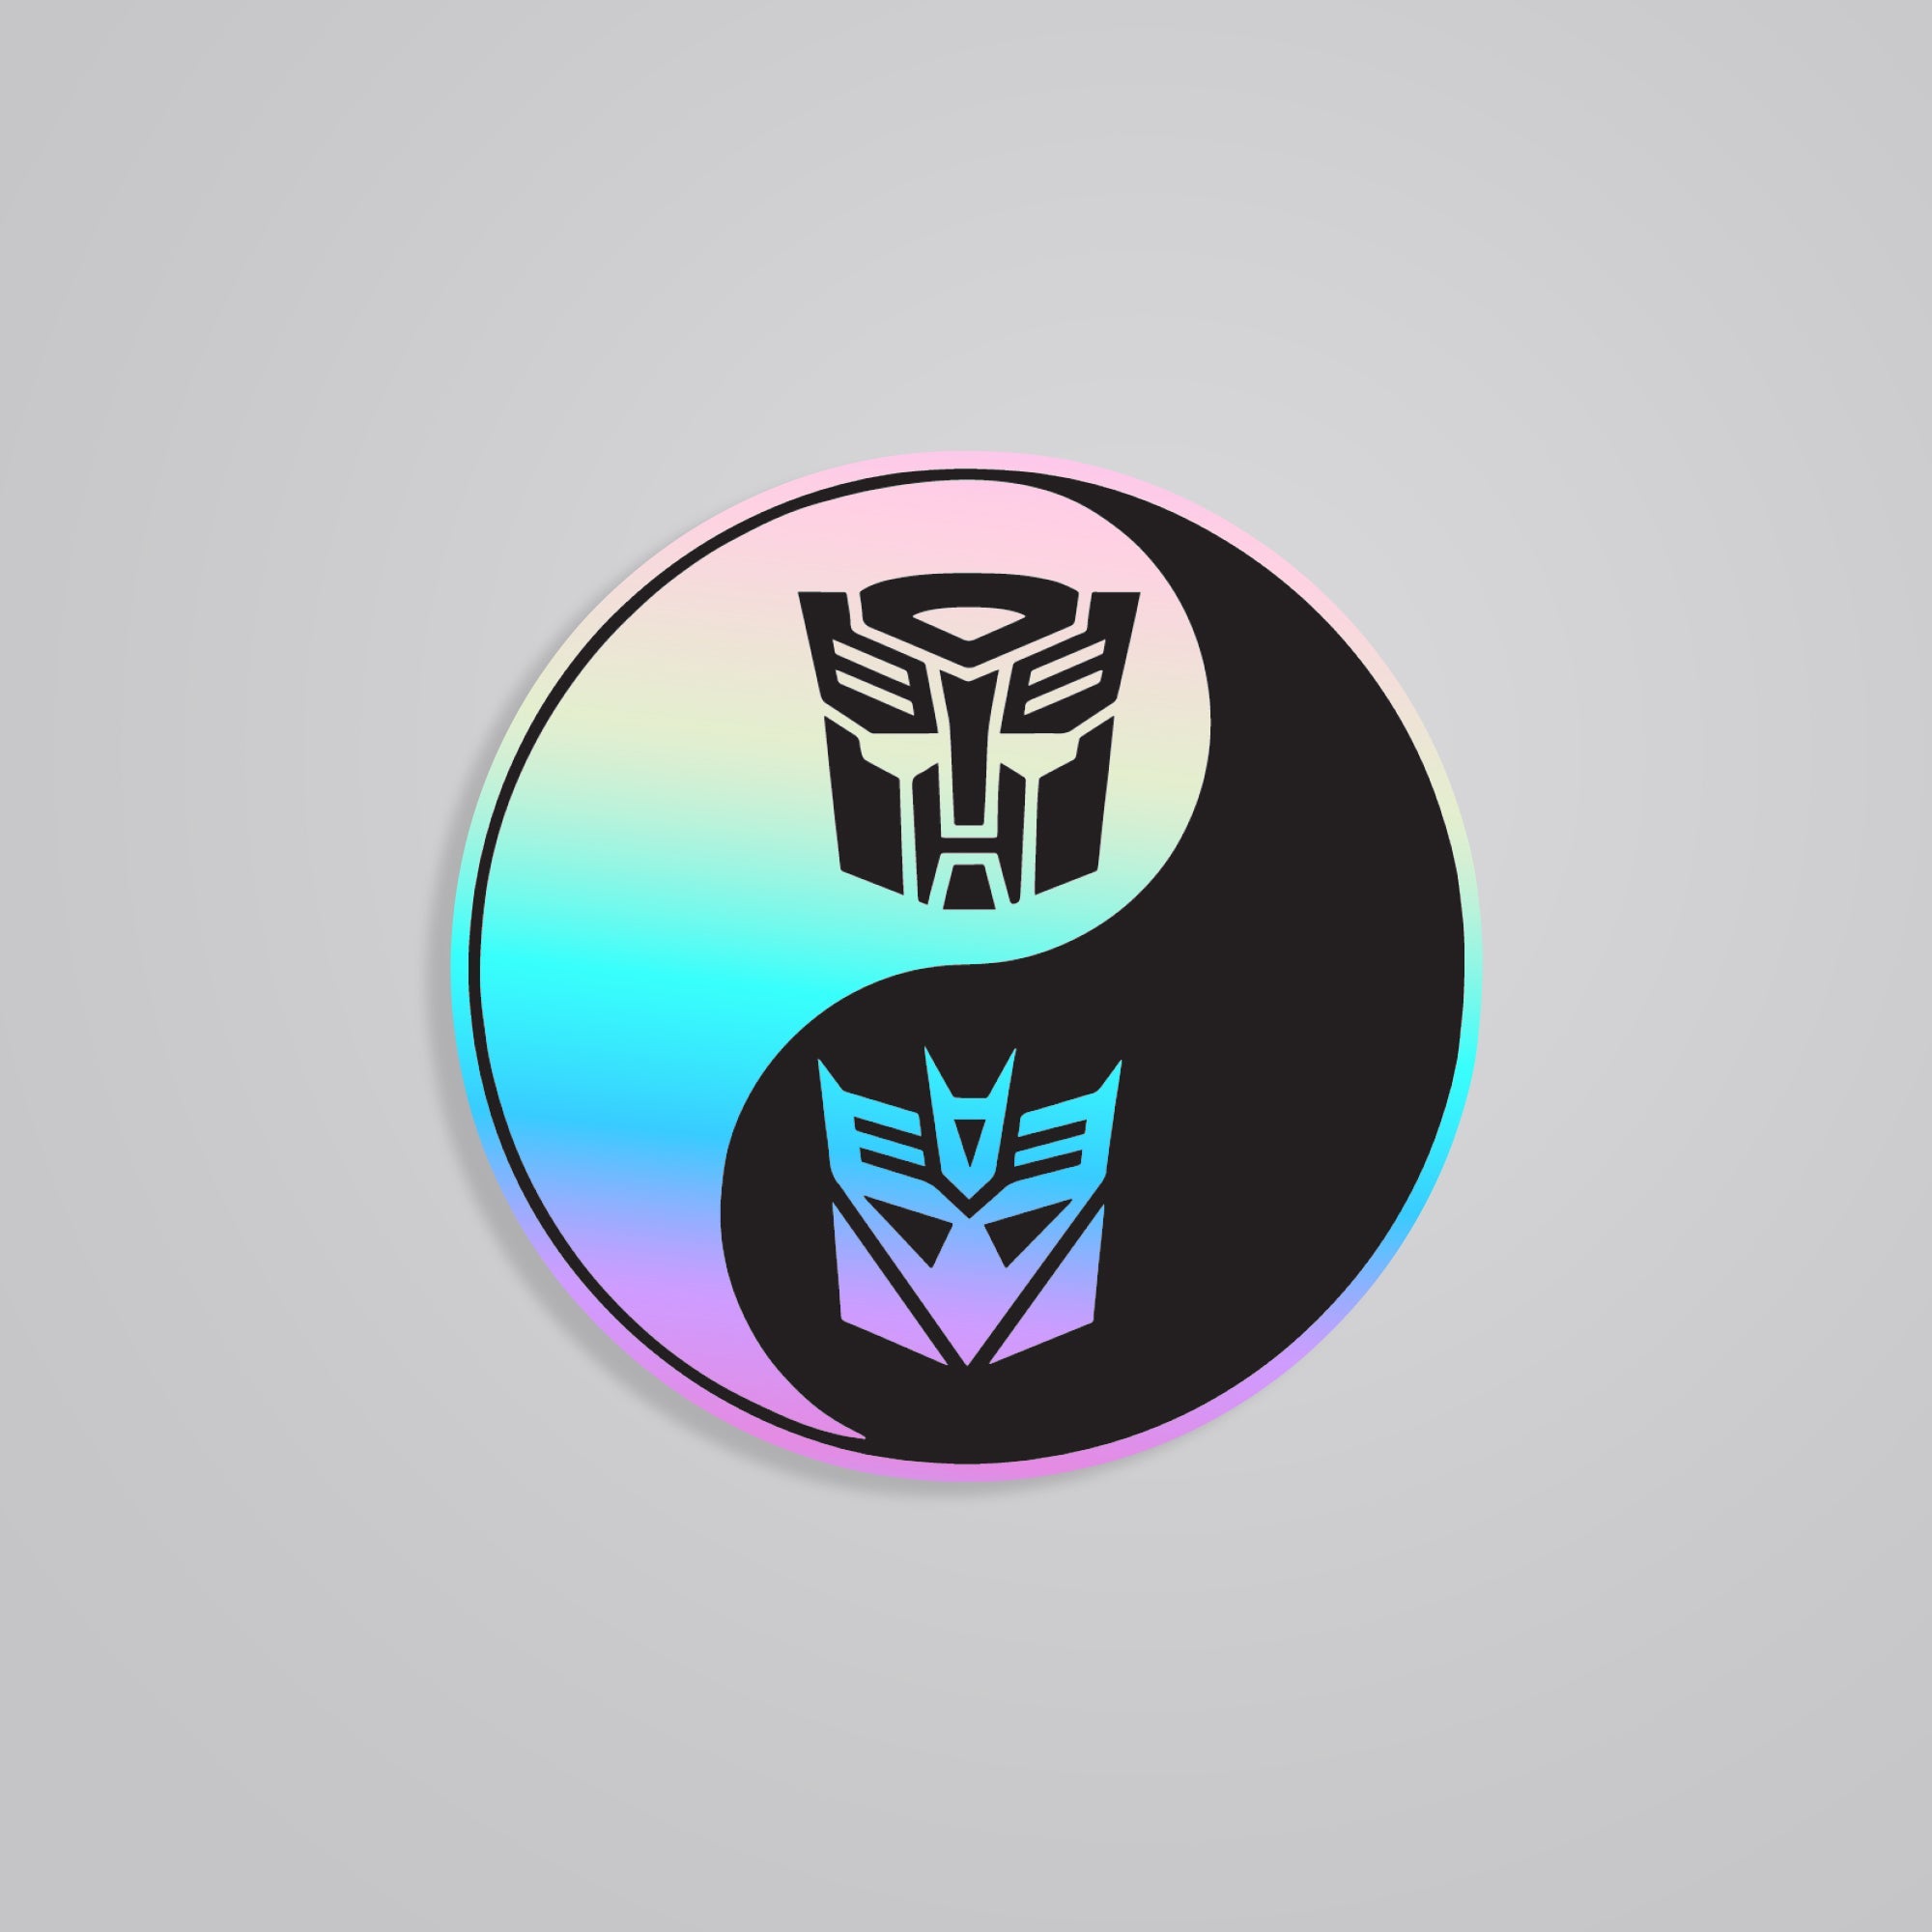 Fomo Store Holographic Stickers Movies Autobot & Deception in Black & White